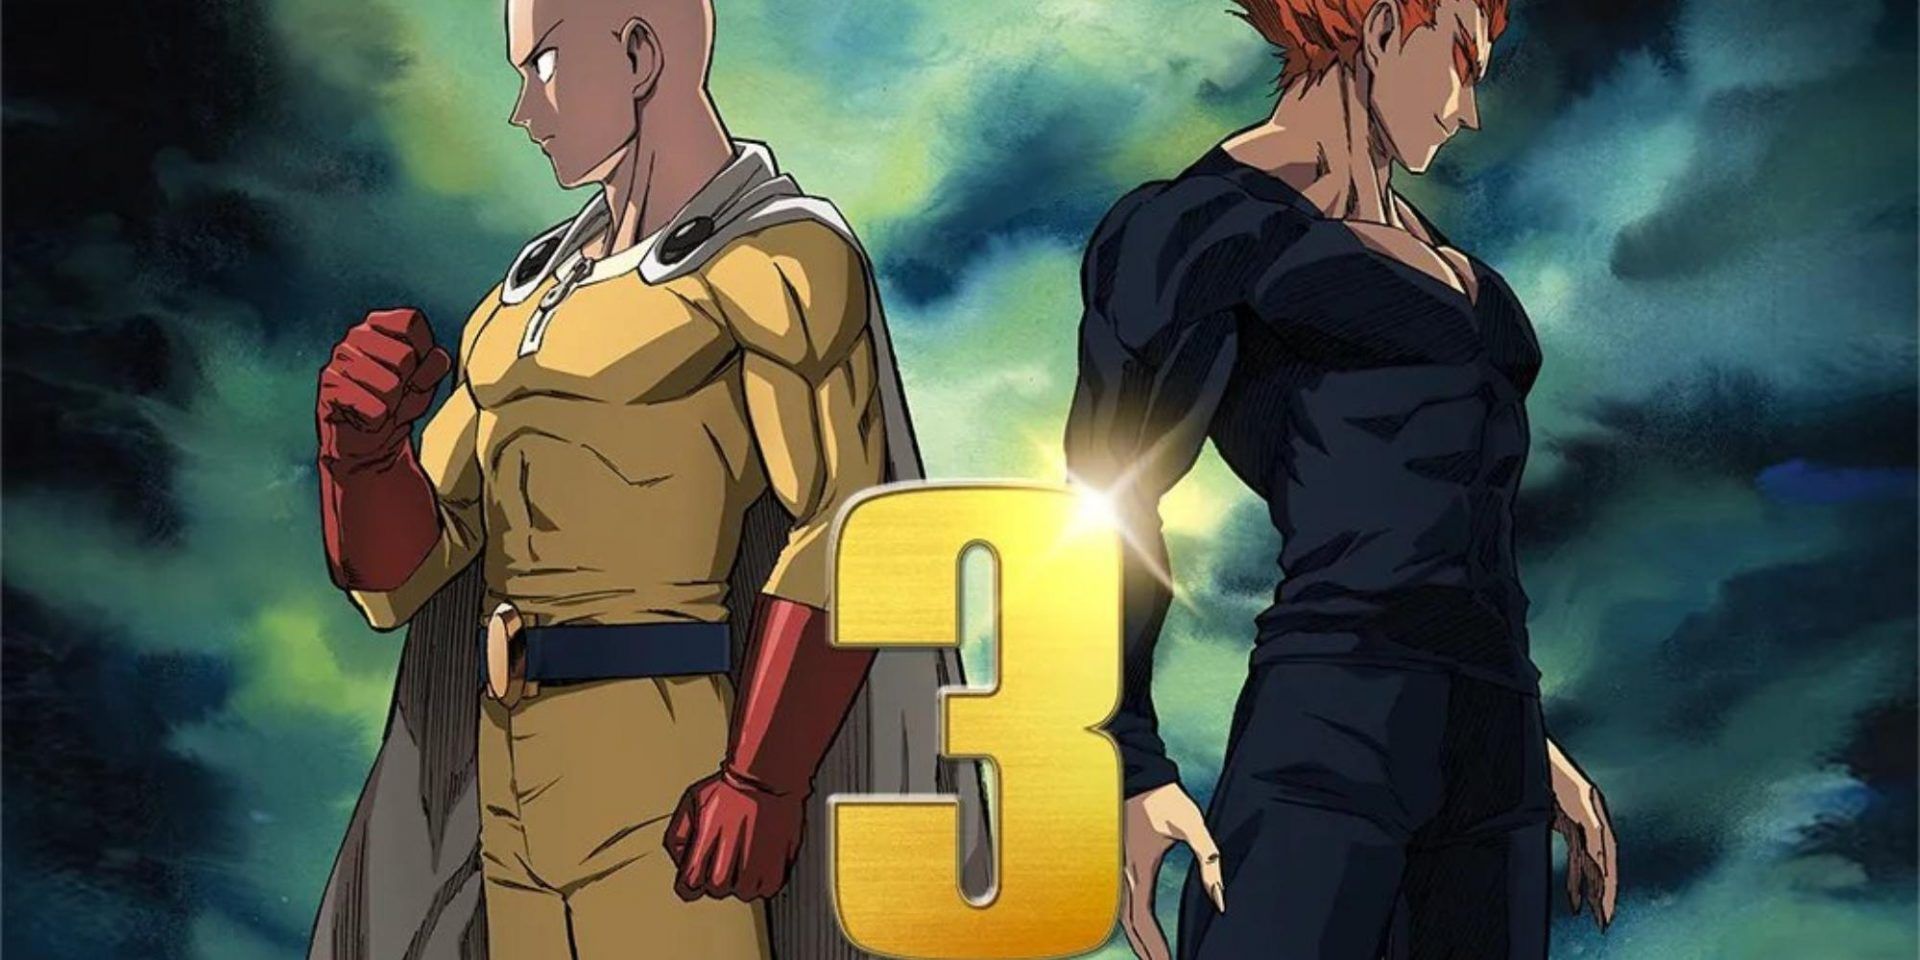 One Punch Man season 3 officially announced